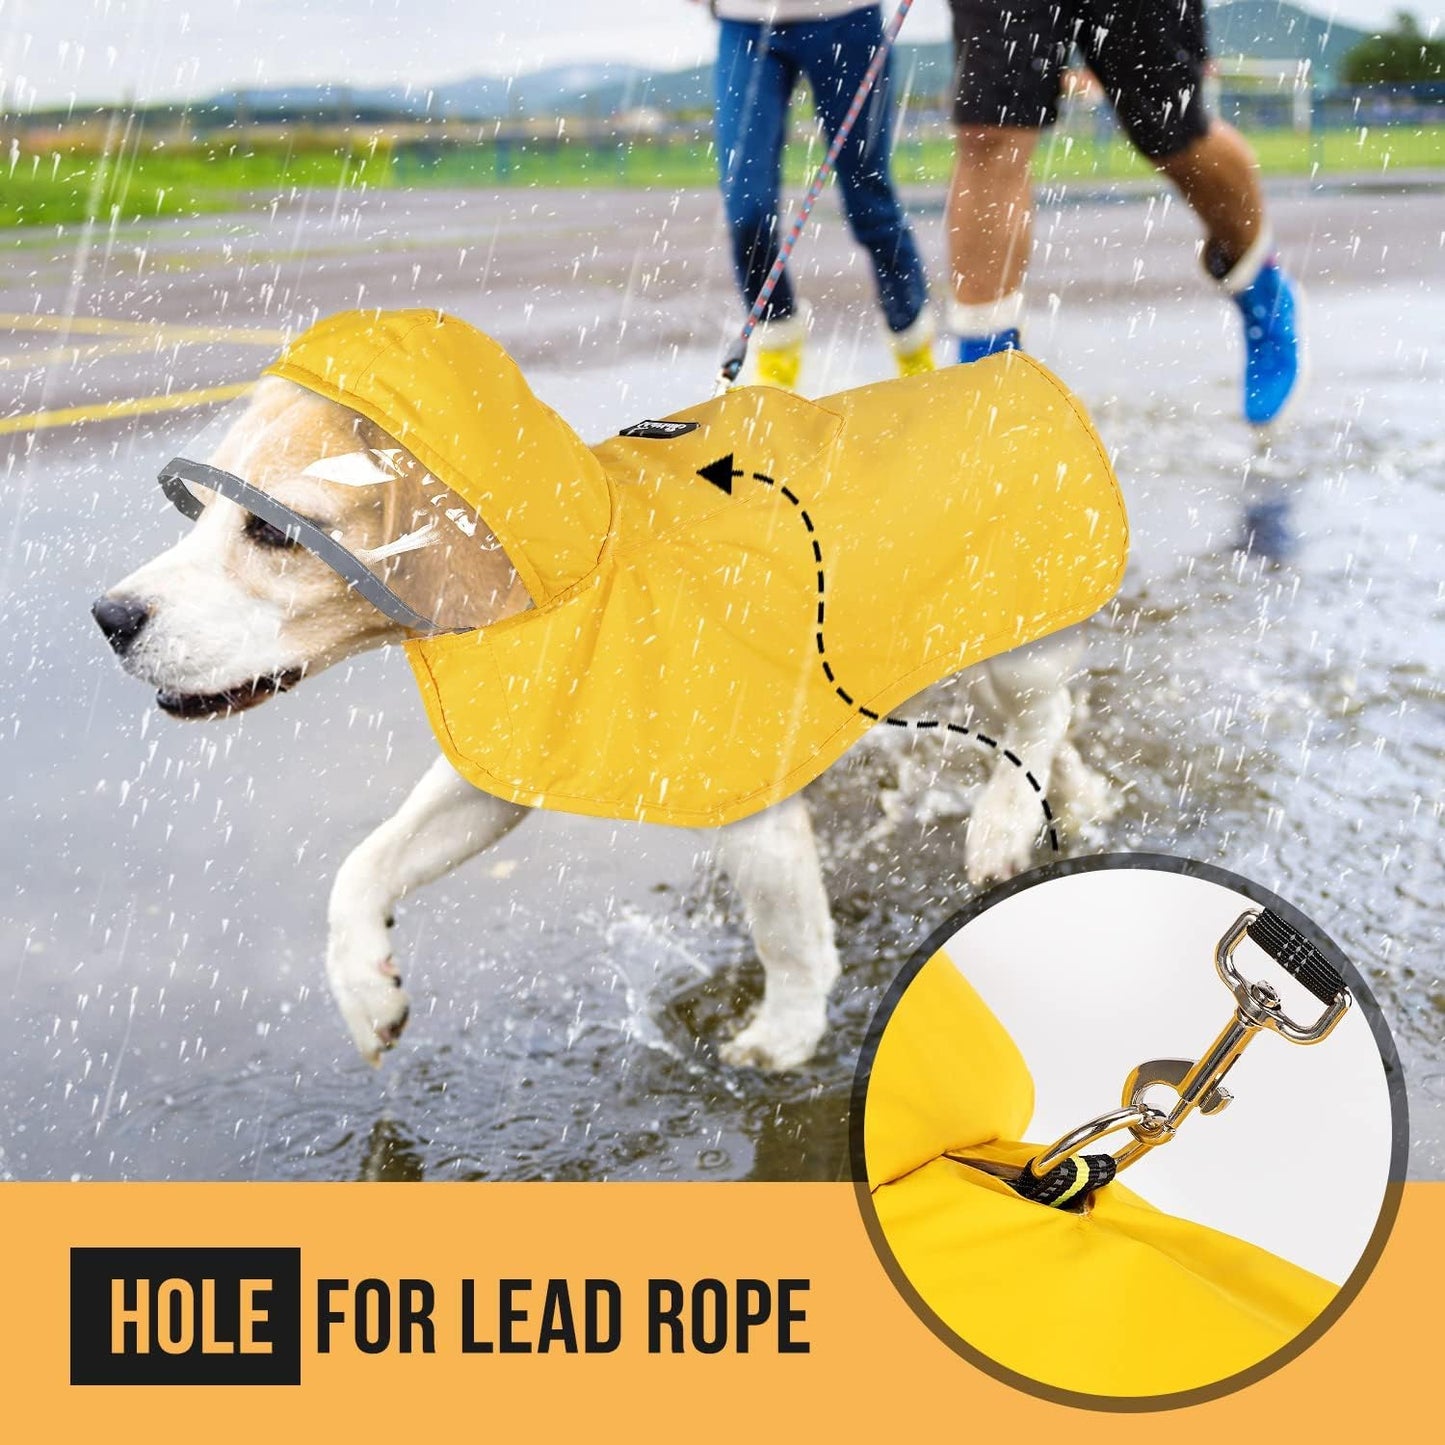 Dog Raincoat, Dog Rain Jacket with Clear Hooded Double Layer for Large Medium Small Dogs Puppies, Adjustable Waterproof Dog Rain Coat Poncho with Reflective Rim & Storage Pocket (L, Yellow)